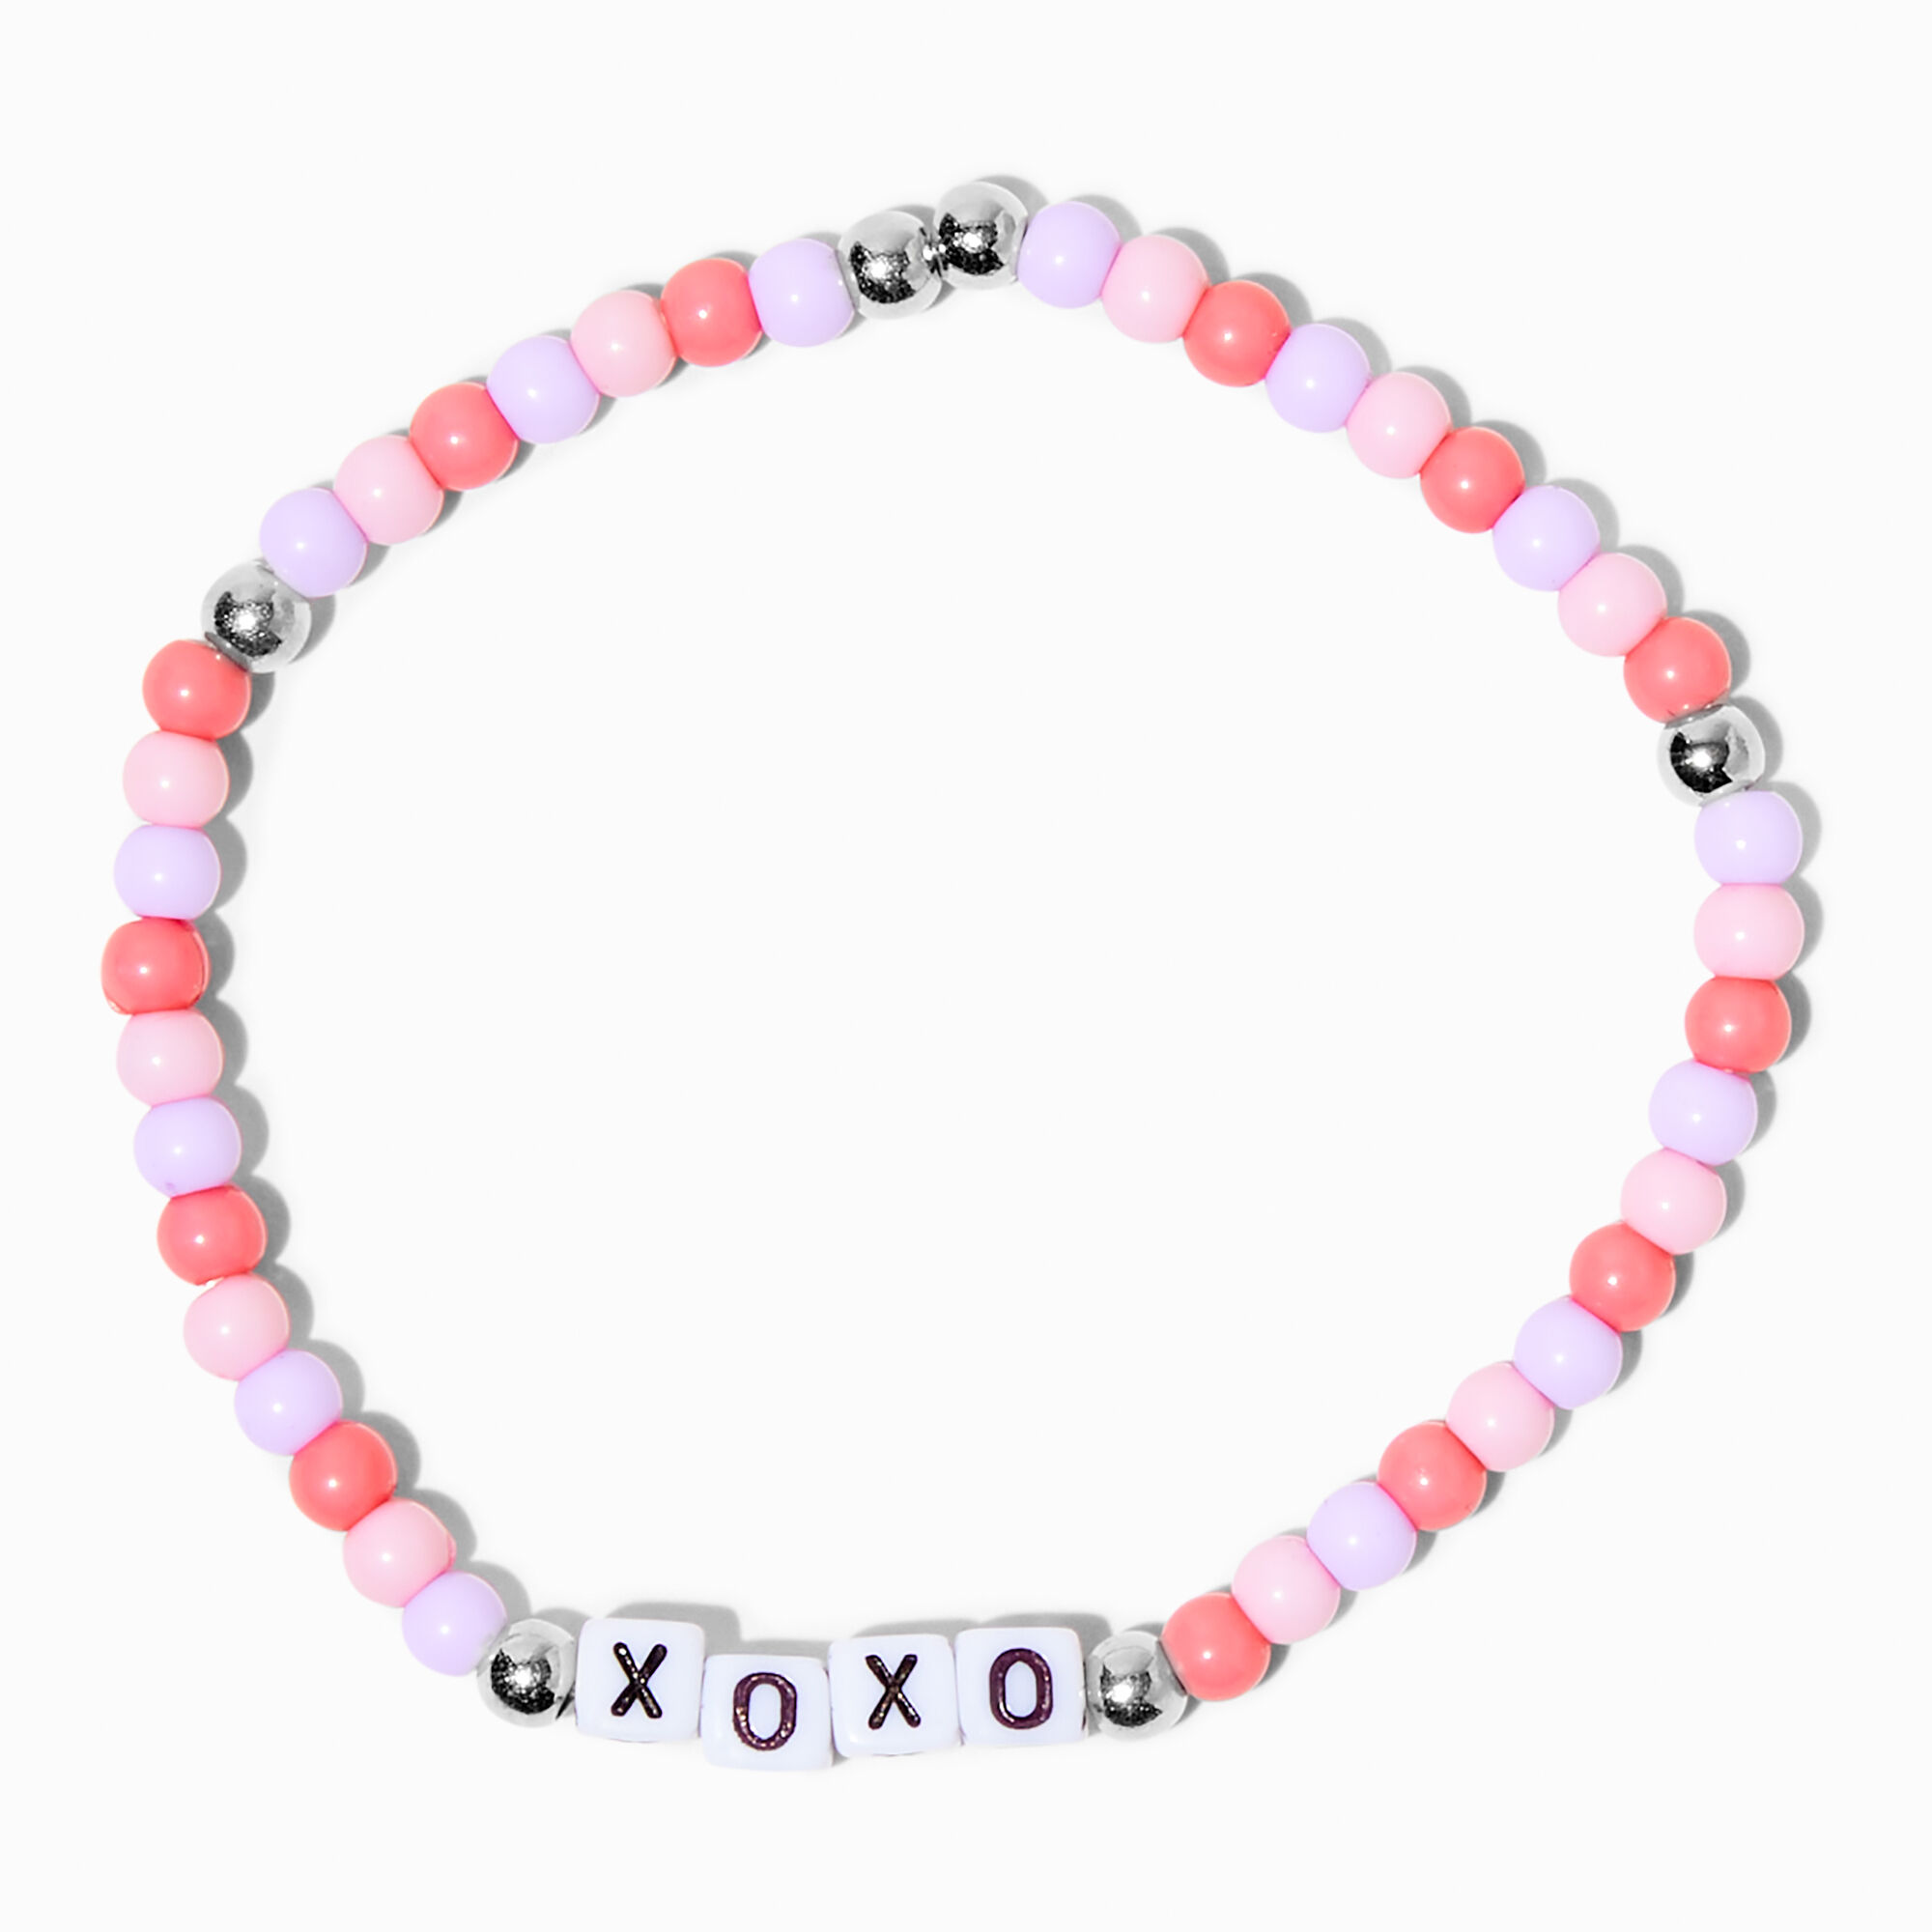 View Claires Xoxo Beaded Stretch Bracelet Pink information